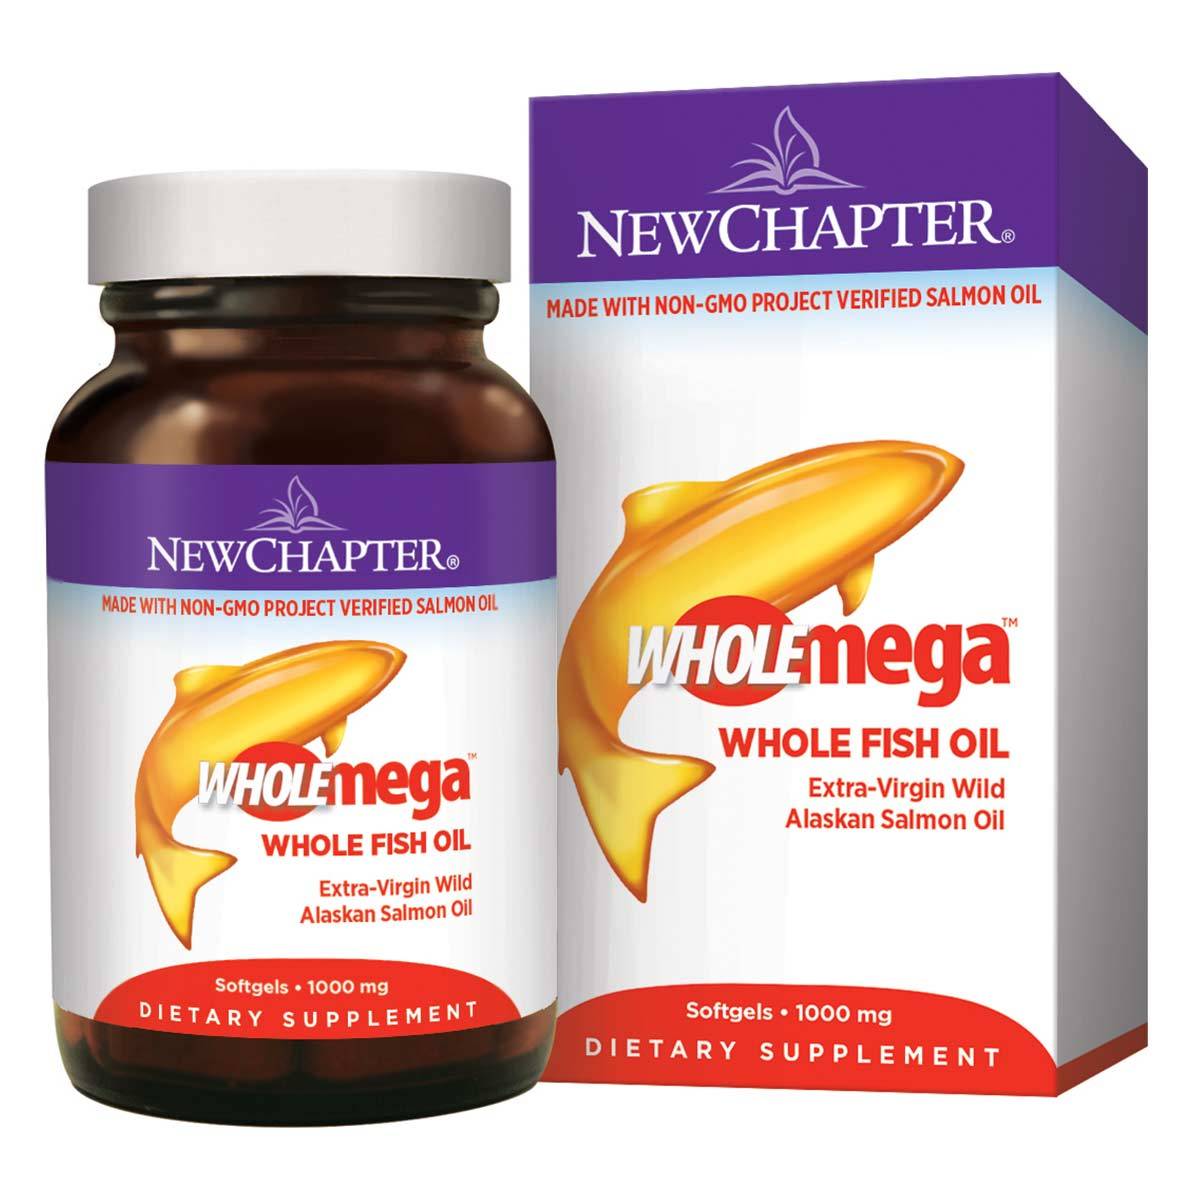 Primary image of Wholemega 1000mg Whole Fish Oil